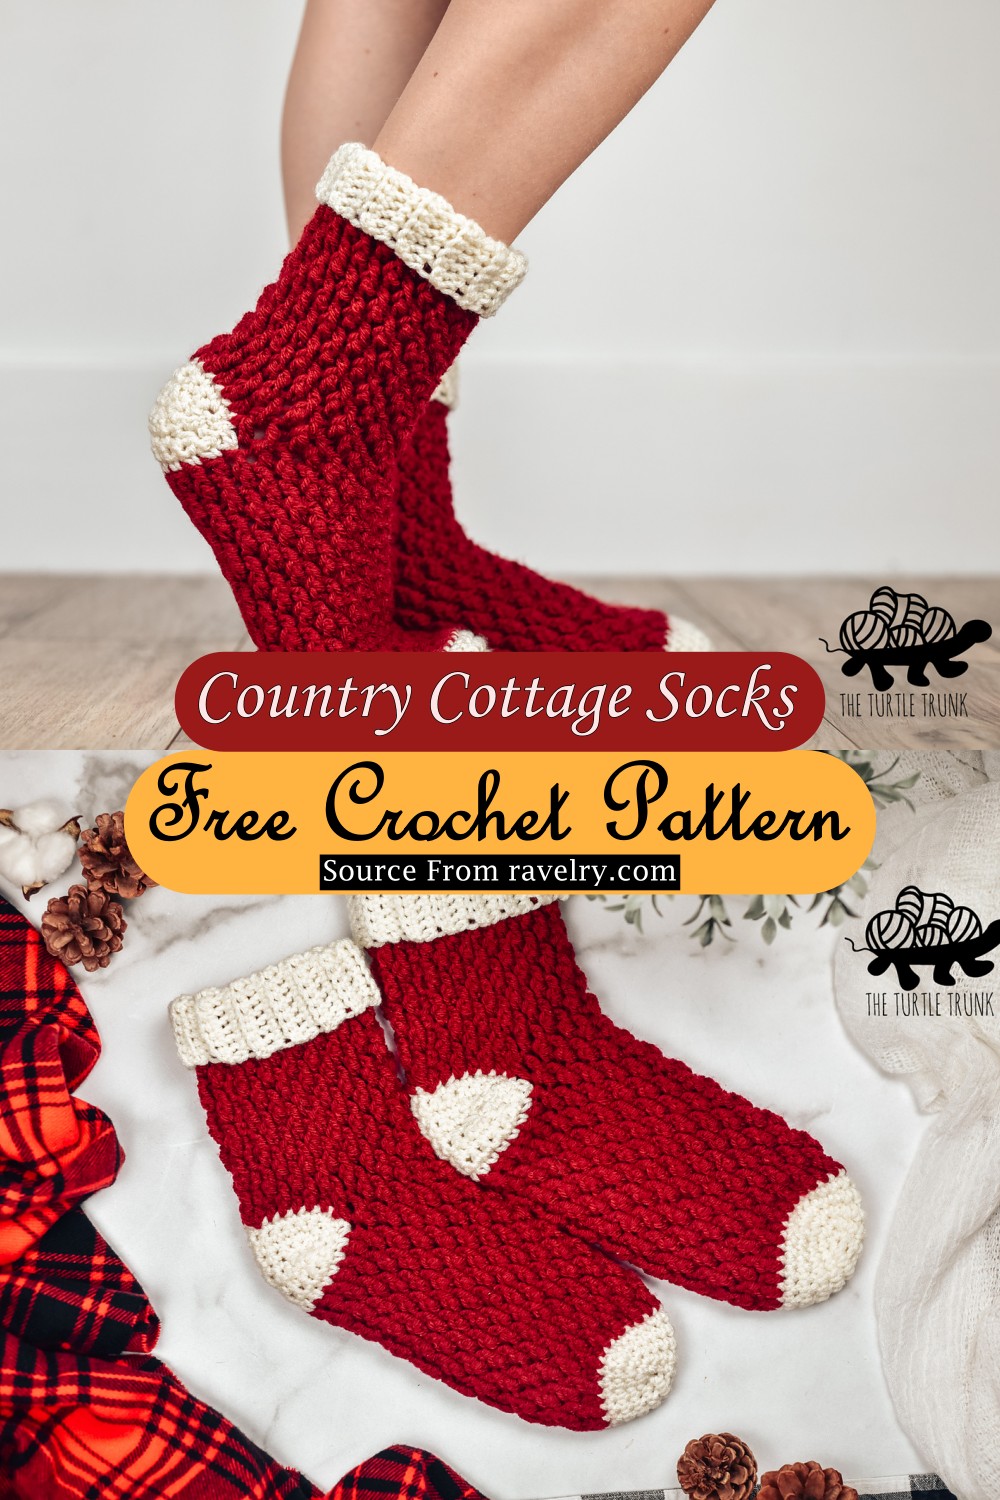 Country Cottage Socks